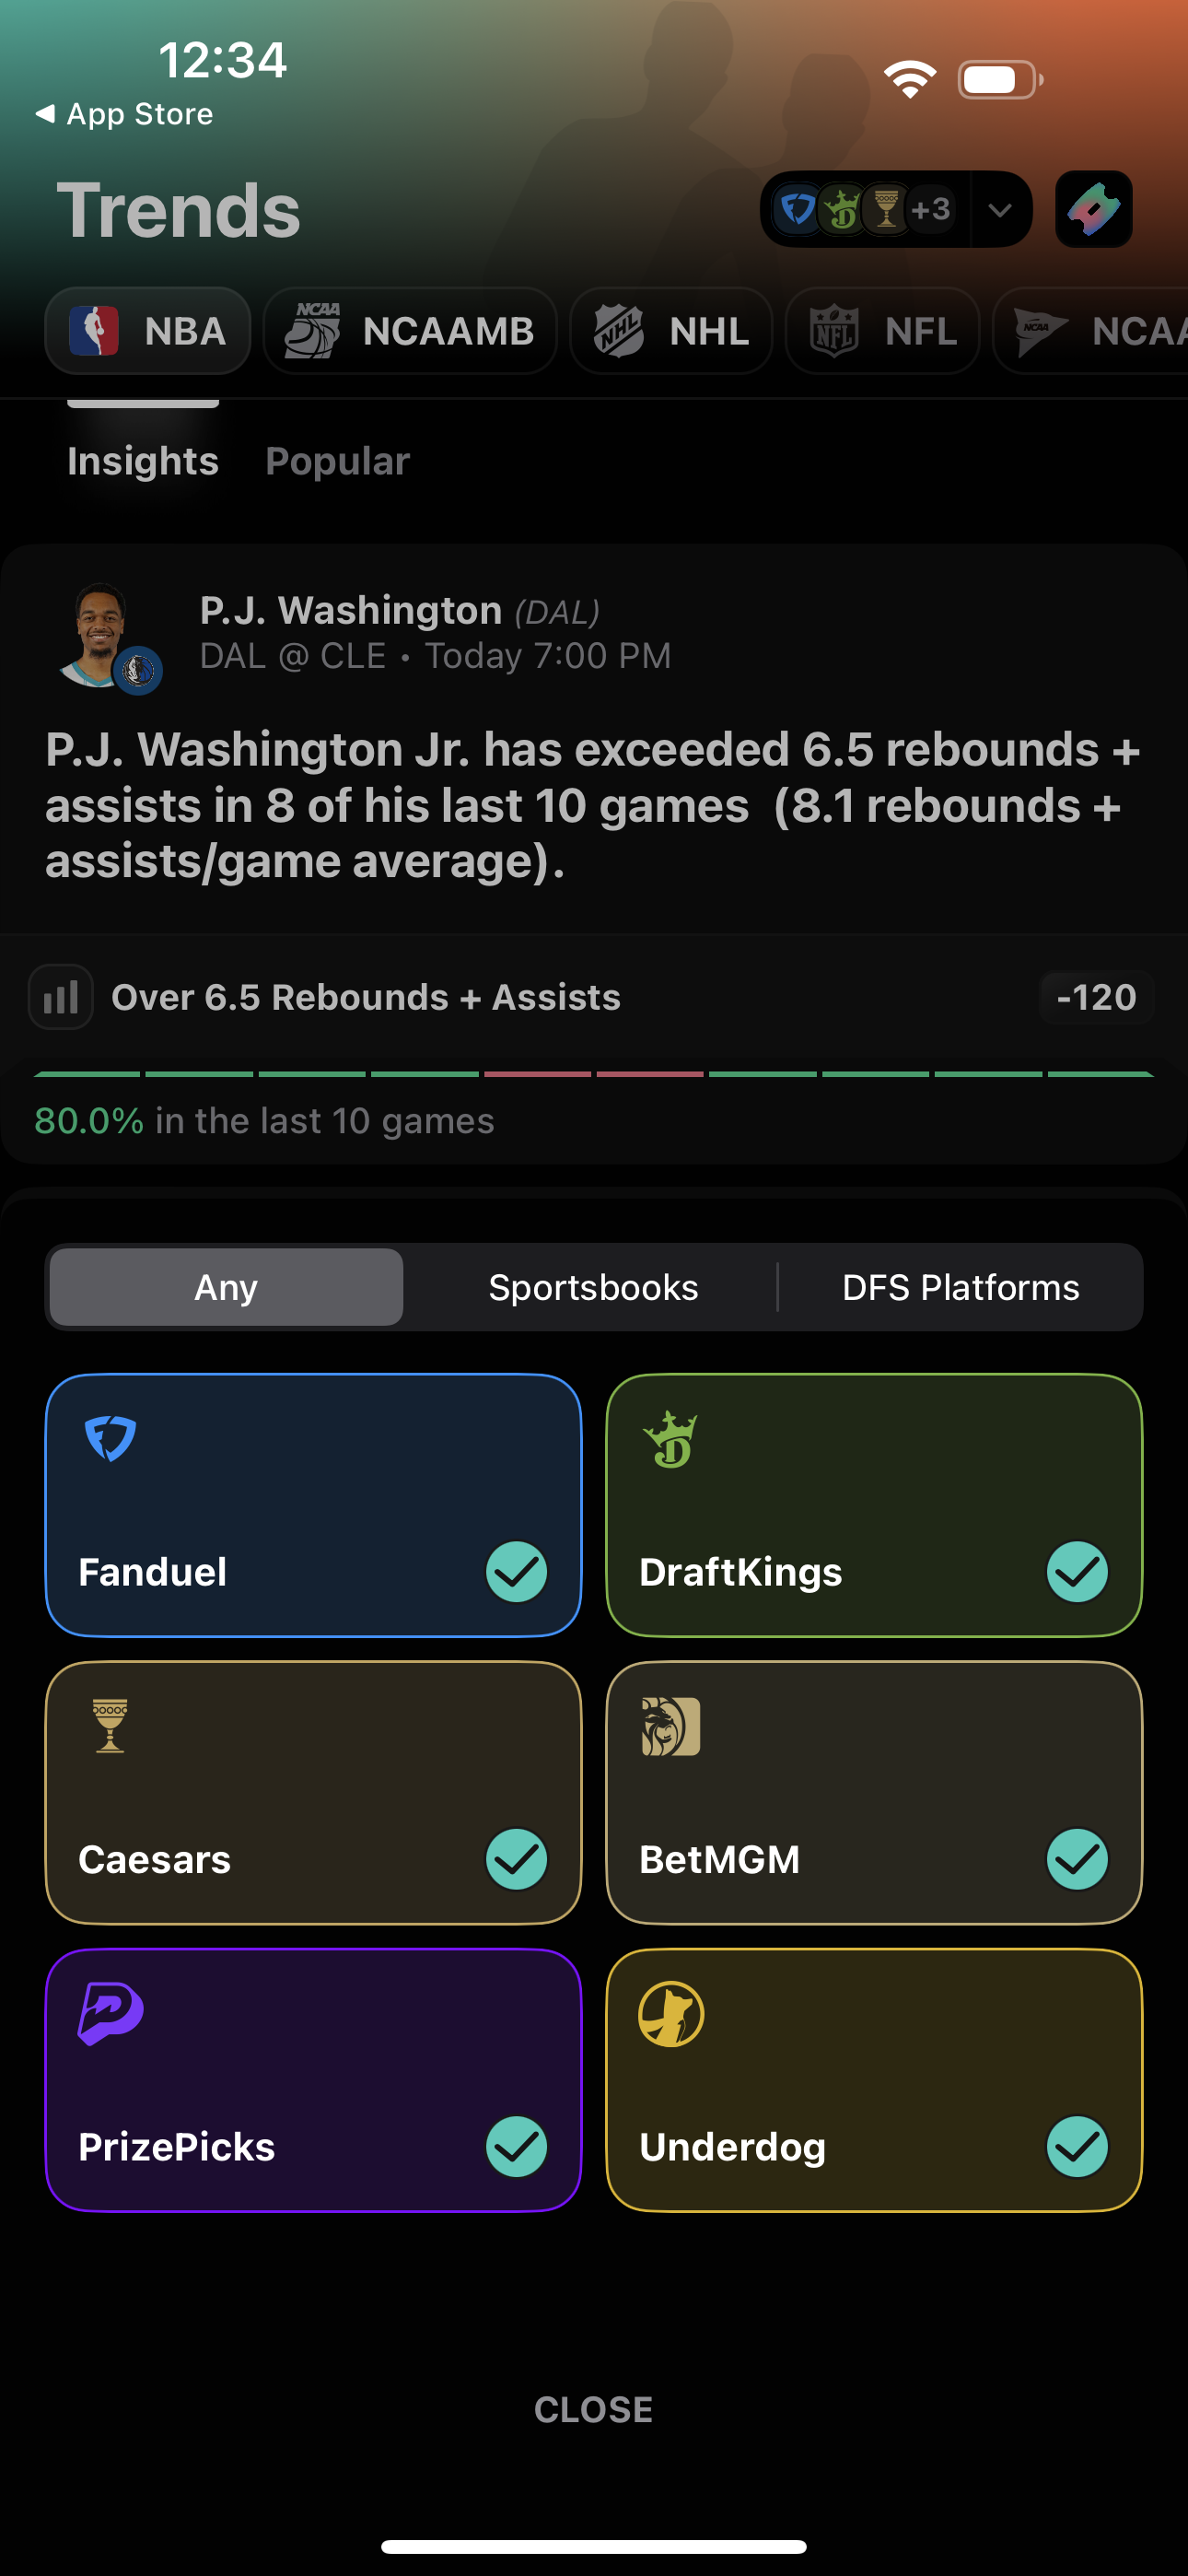 sports books and dfs apps that are integrated with outlier